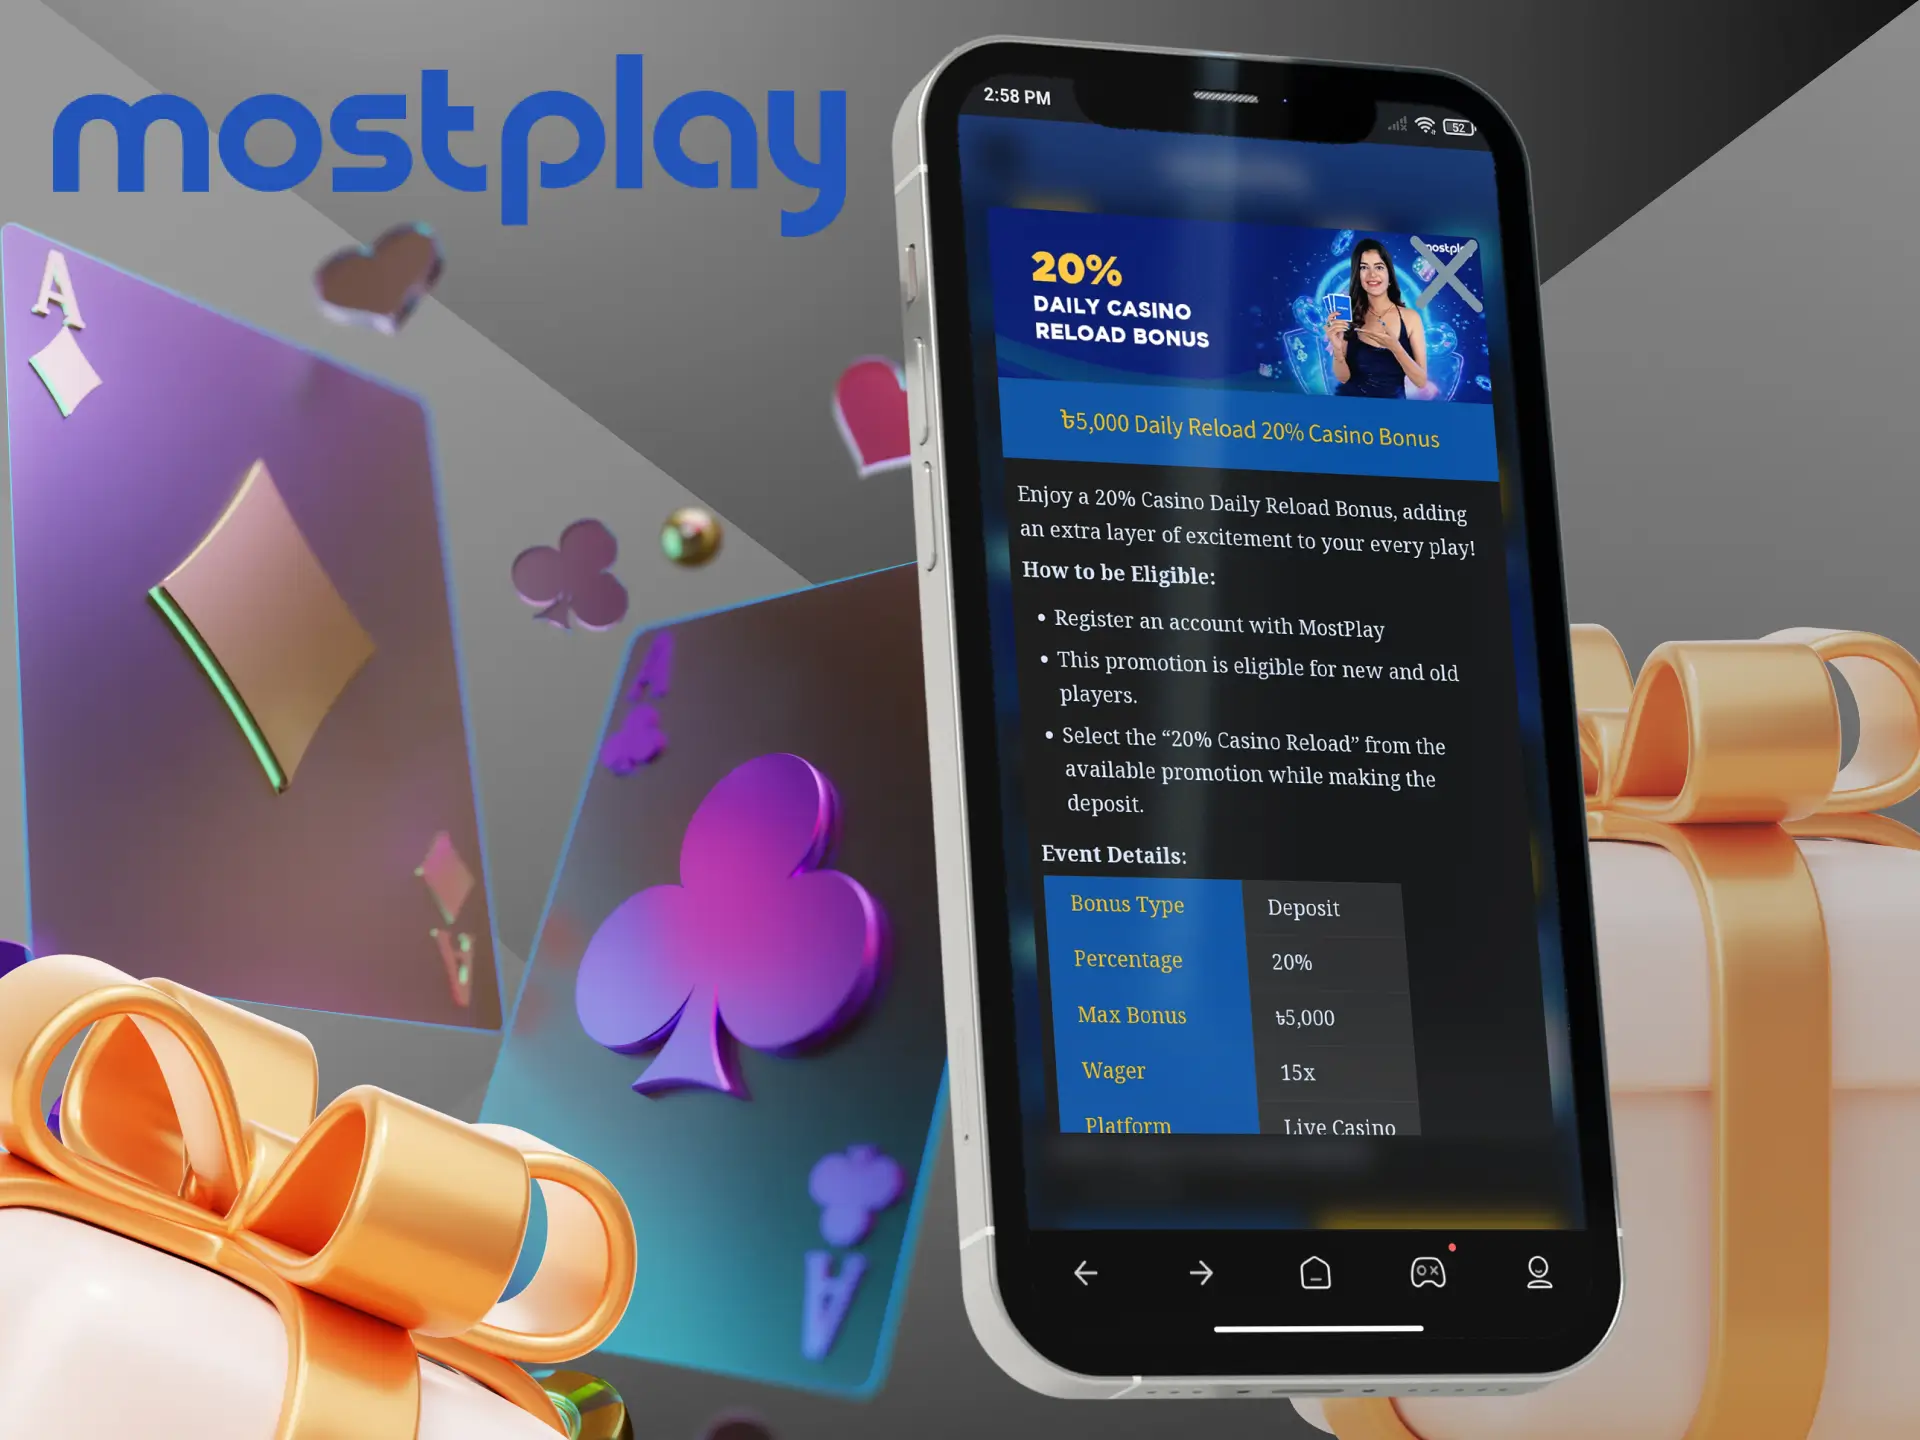 Mostplay gives you the chance to win big with a daily bonus when you top up your account.